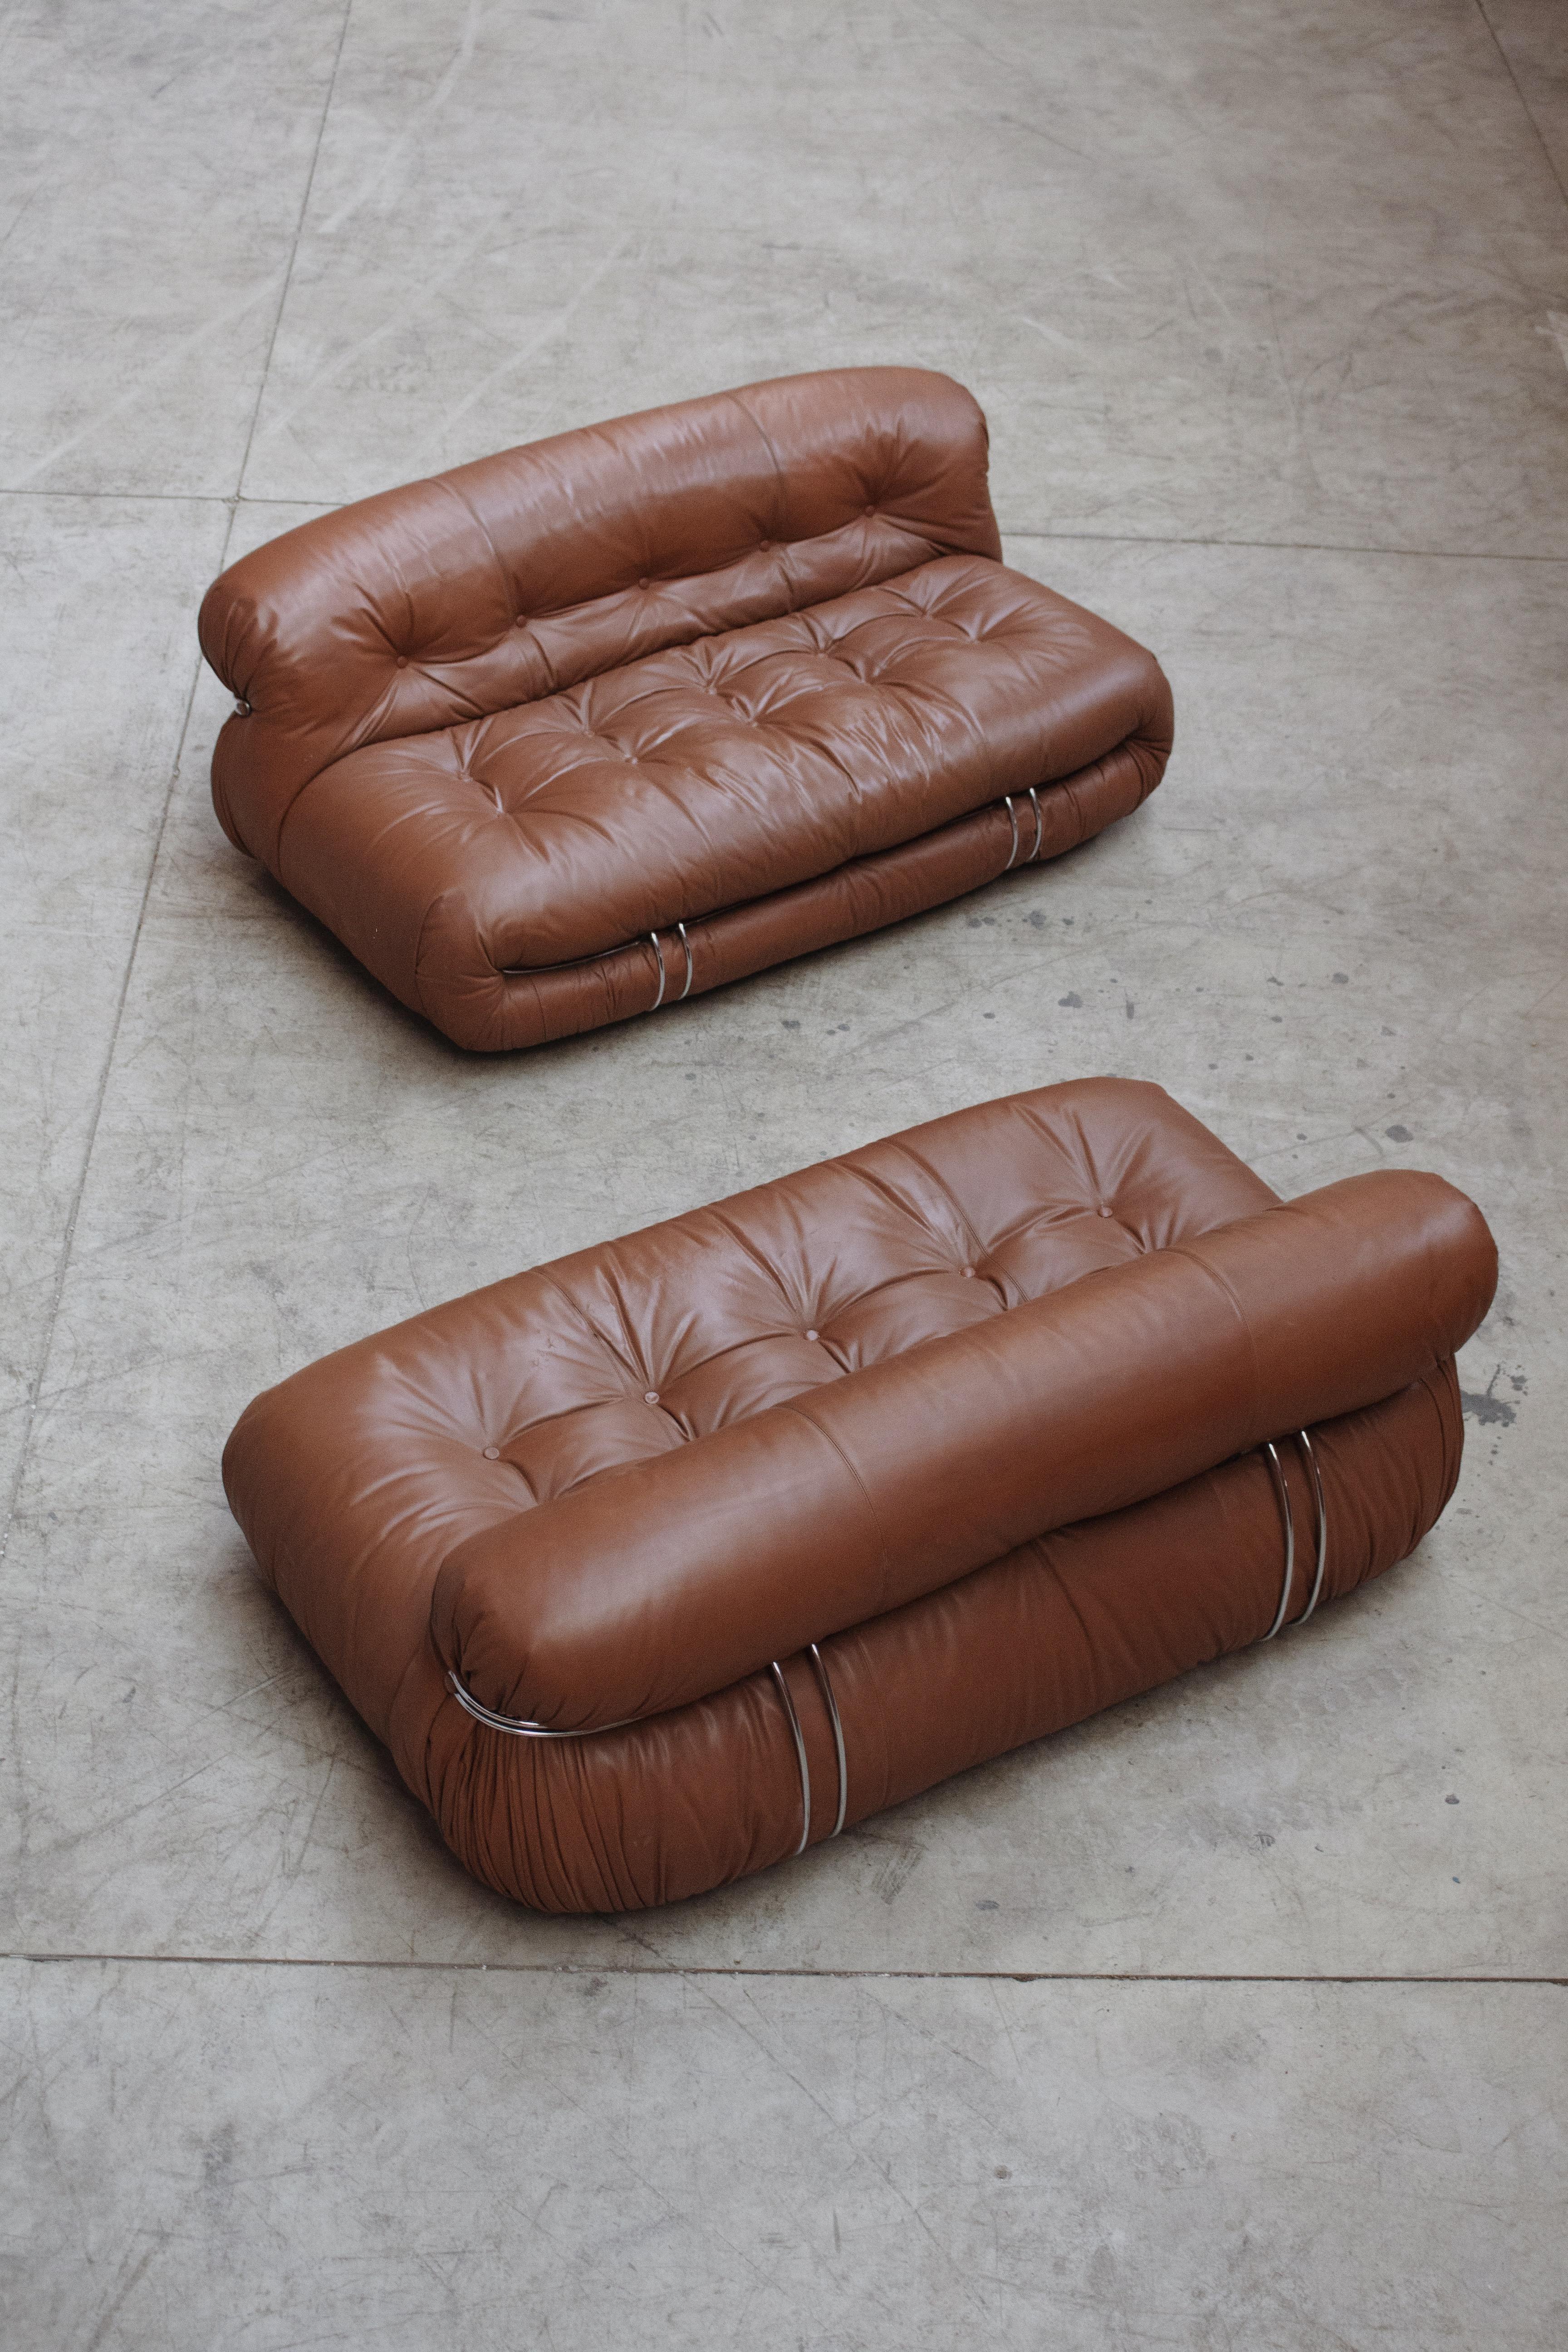 Afra & Tobia Scarpa Pair of “Soriana” Sofas for Cassina, original cognac leather, 1969

Although technically designed in the 1960s, the 